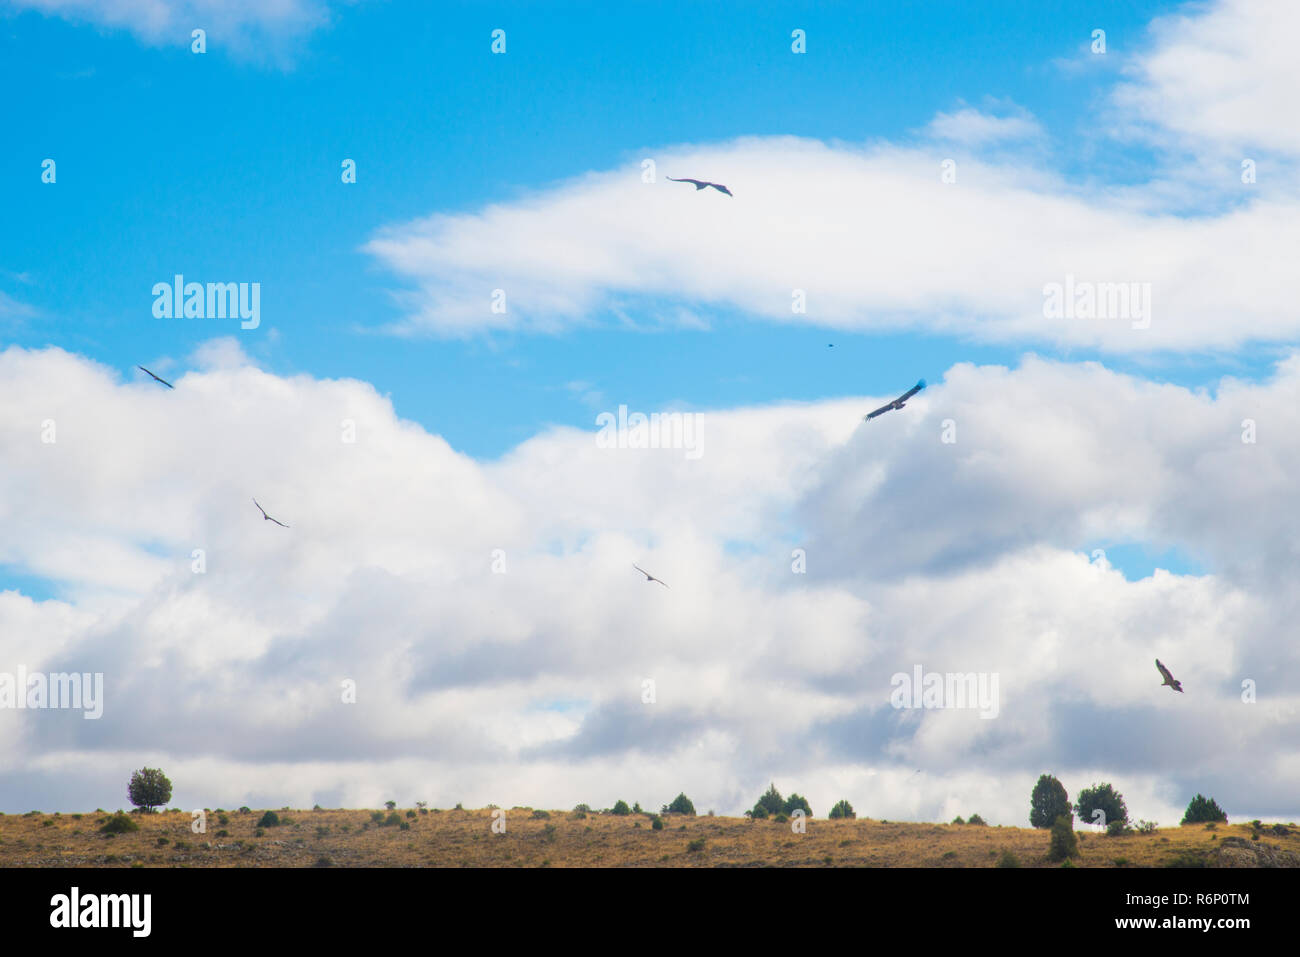 Vultures flying on cloudy sky. Stock Photo